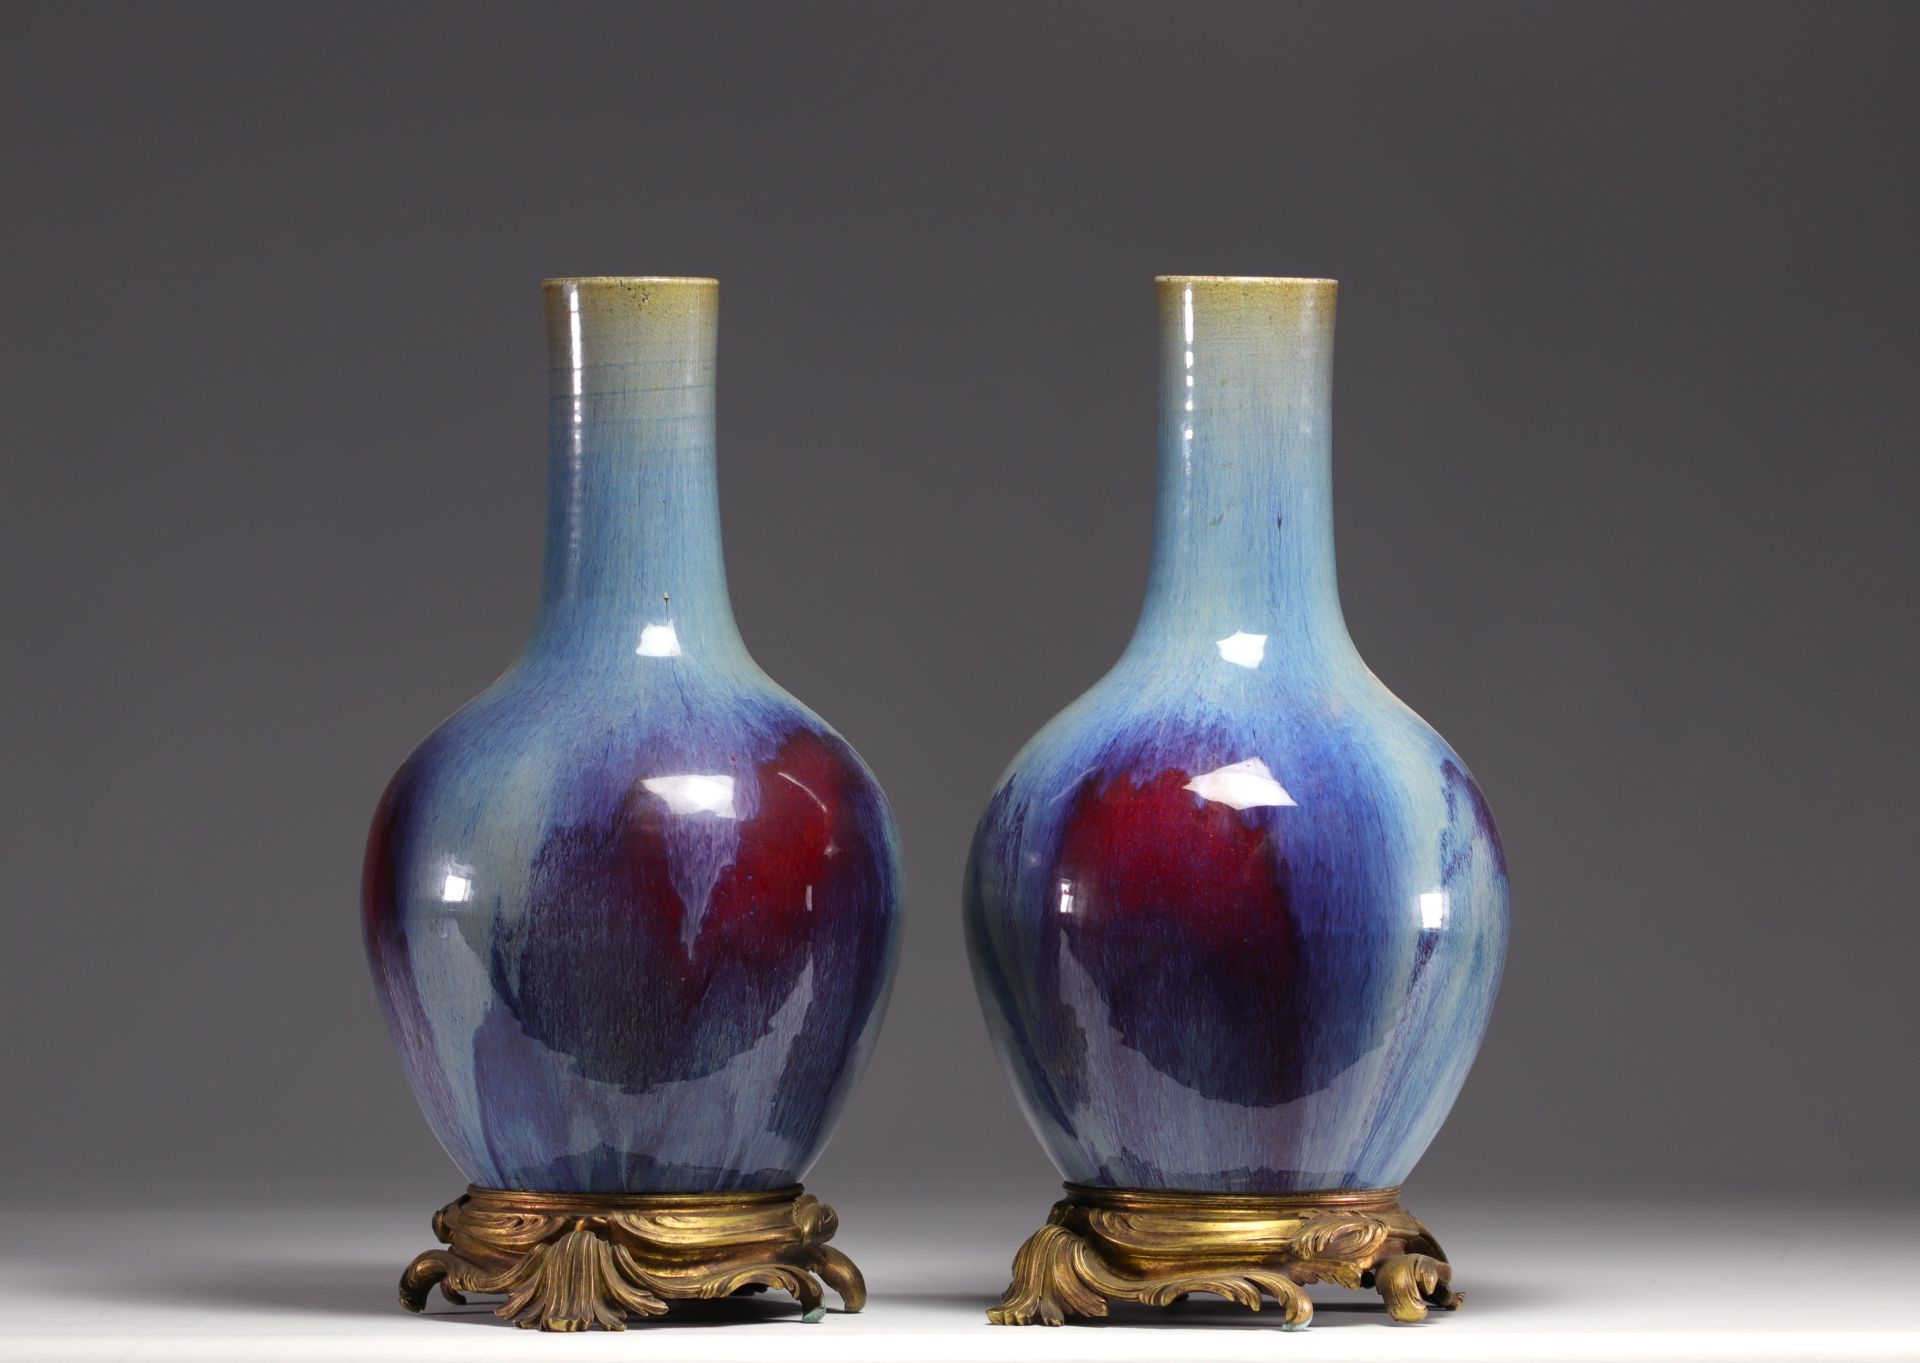 Rare pair of porcelain vases with flamed glaze mounted on bronze from 18th century - Image 3 of 5